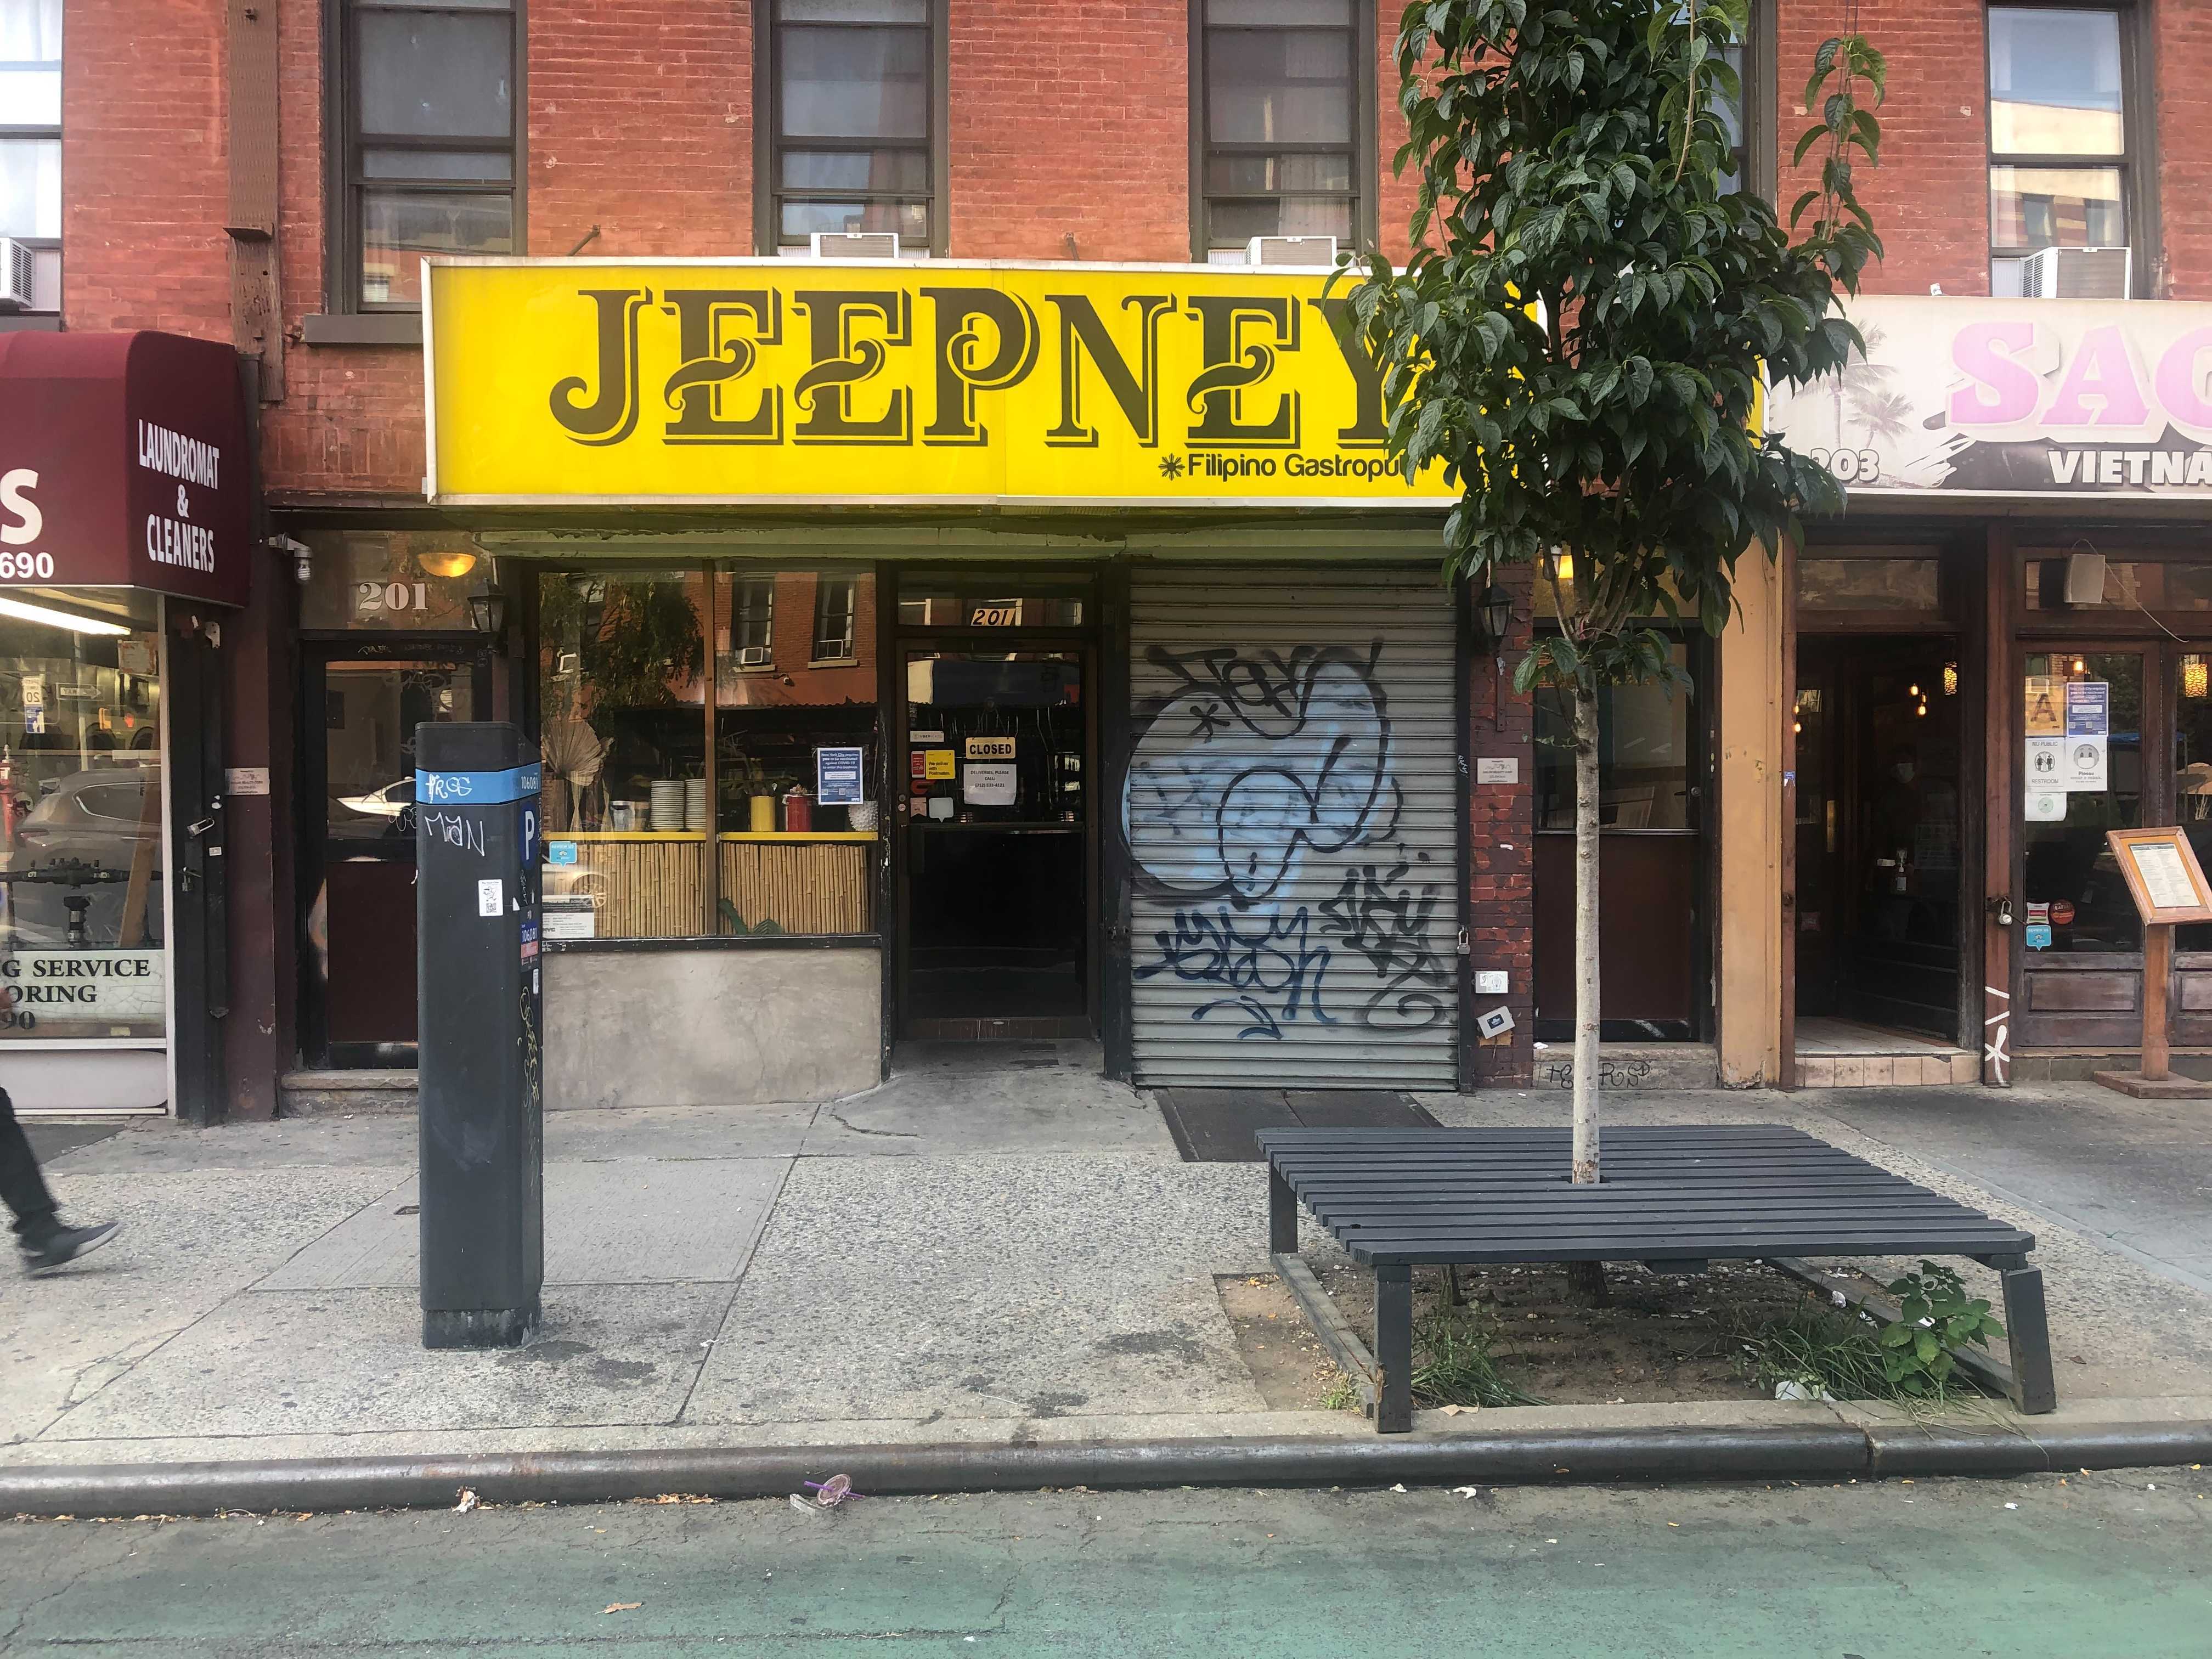 A New York City storefront with a closed steel grate that is covered in graffiti. The restaurant’s yellow sign reads “Jeepney” in brown lettering.